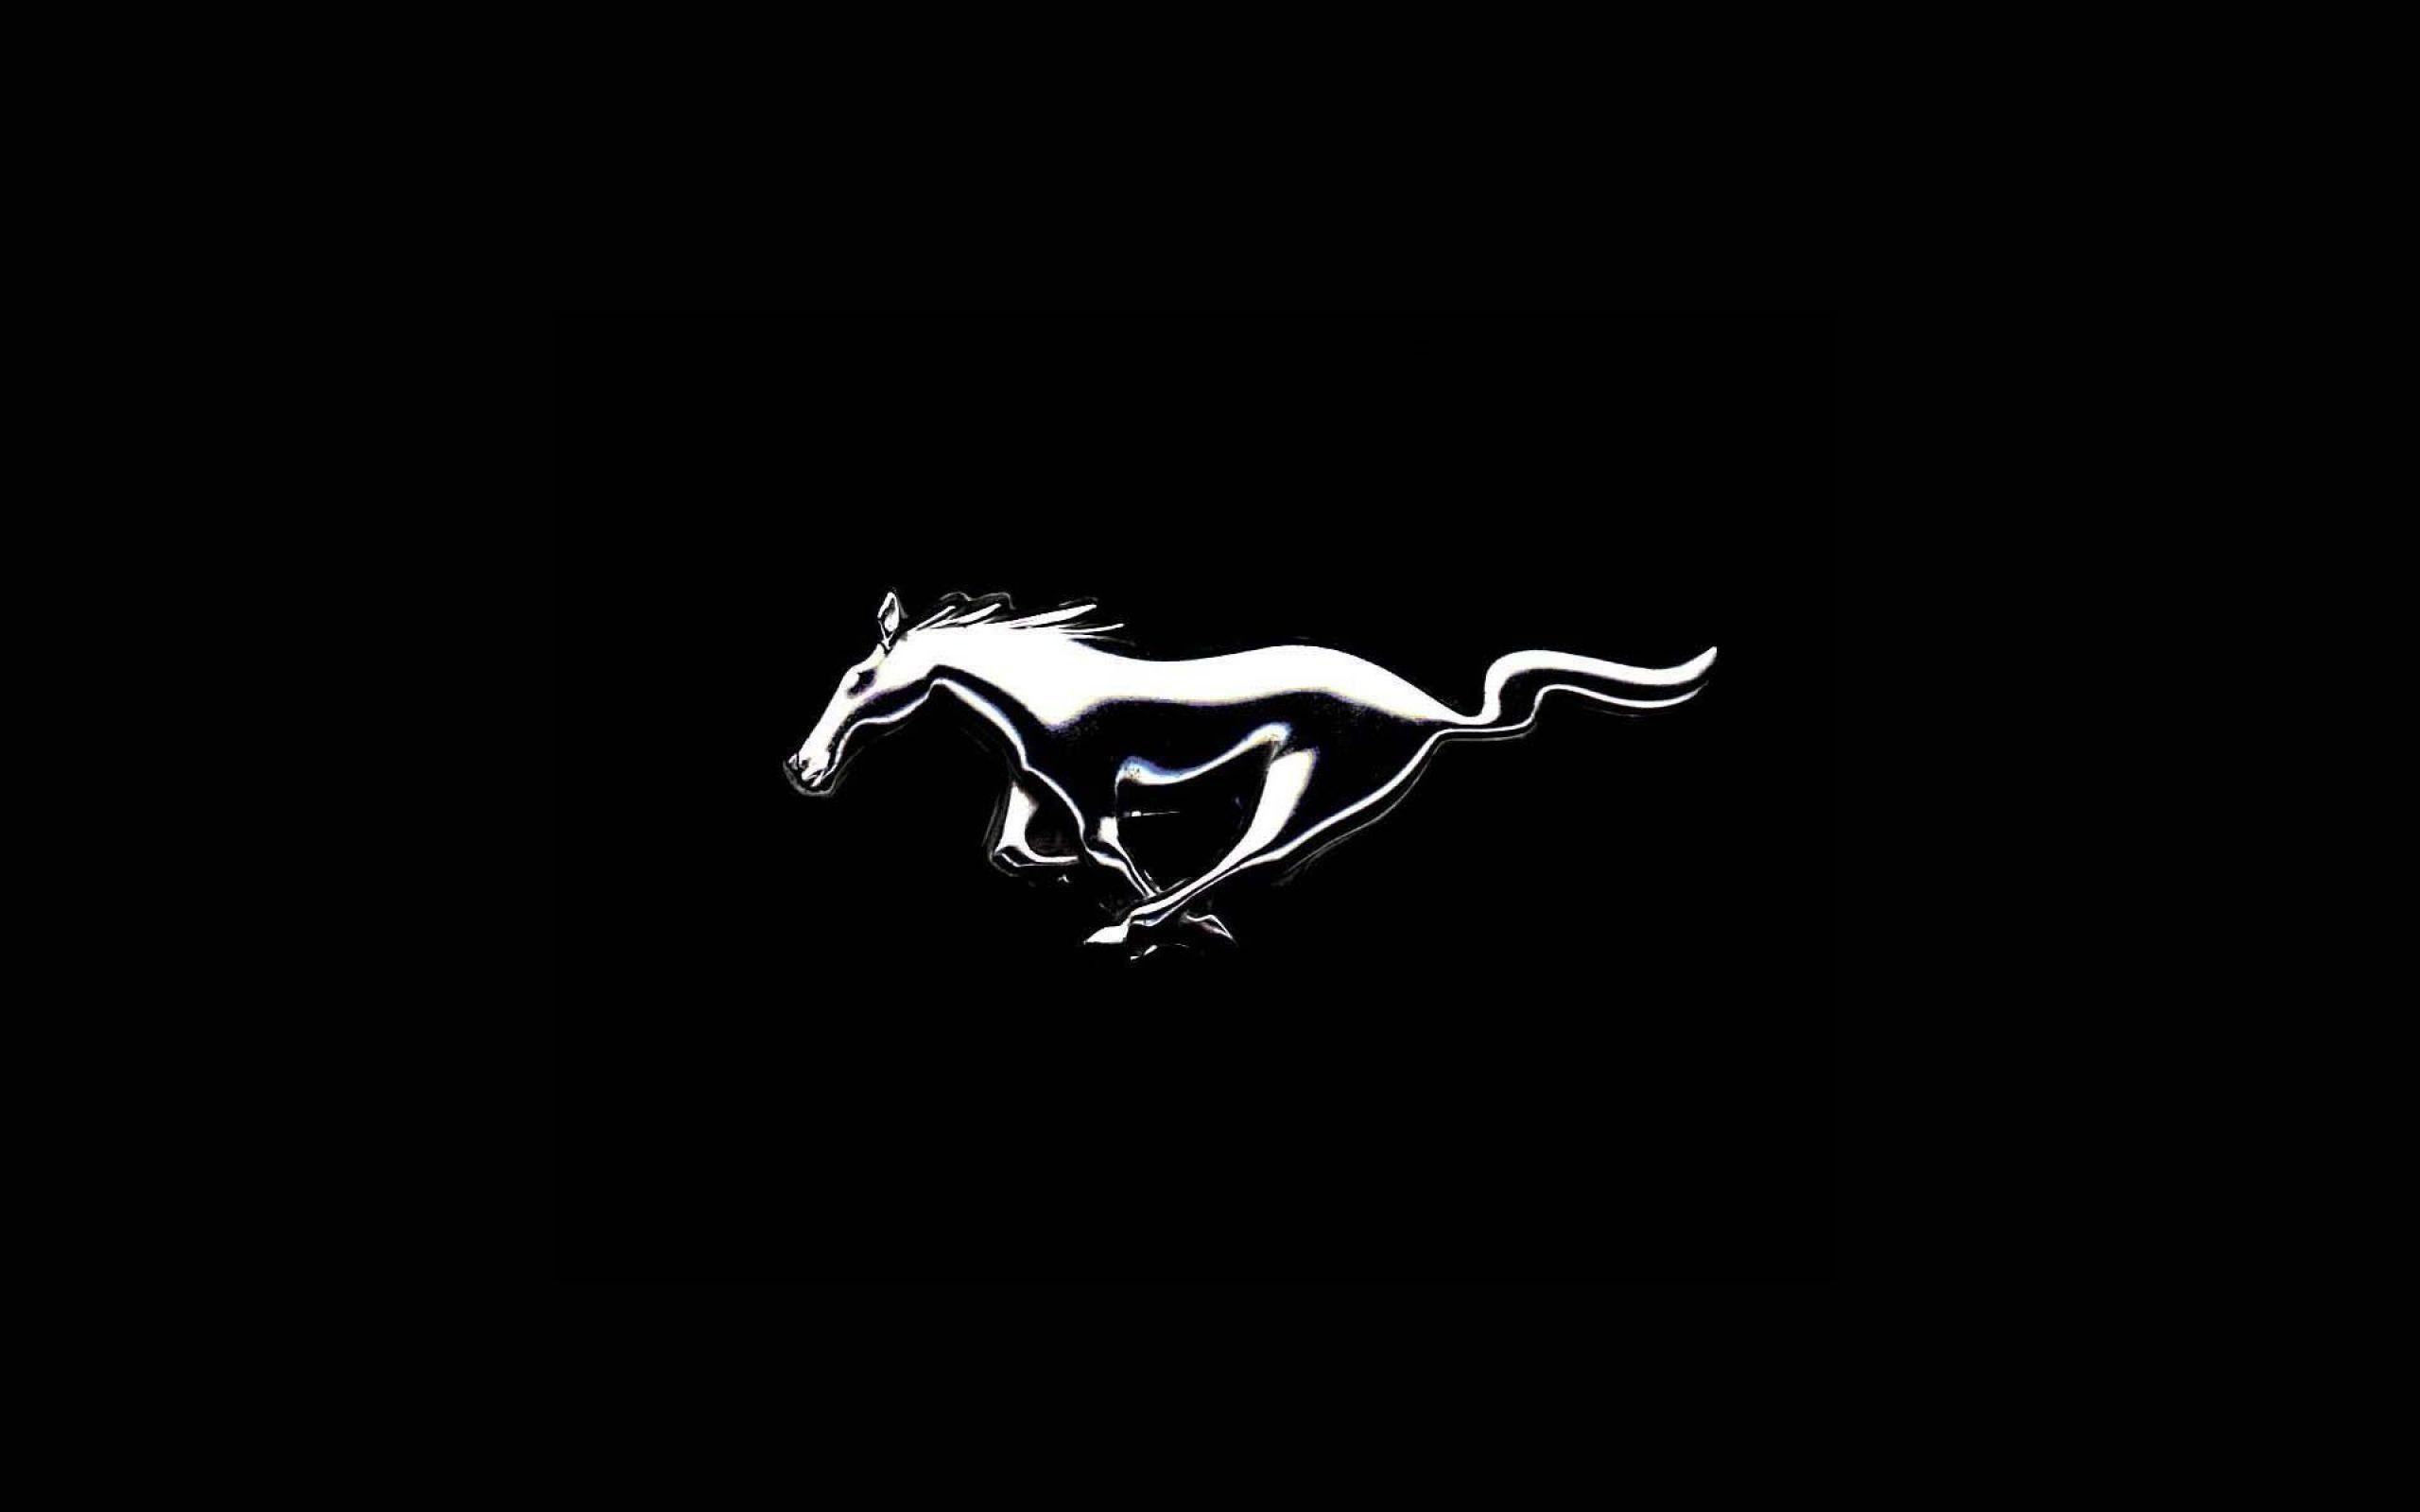 Black and White Ford Mustang Logo - Ford Mustang Logo Wallpaper